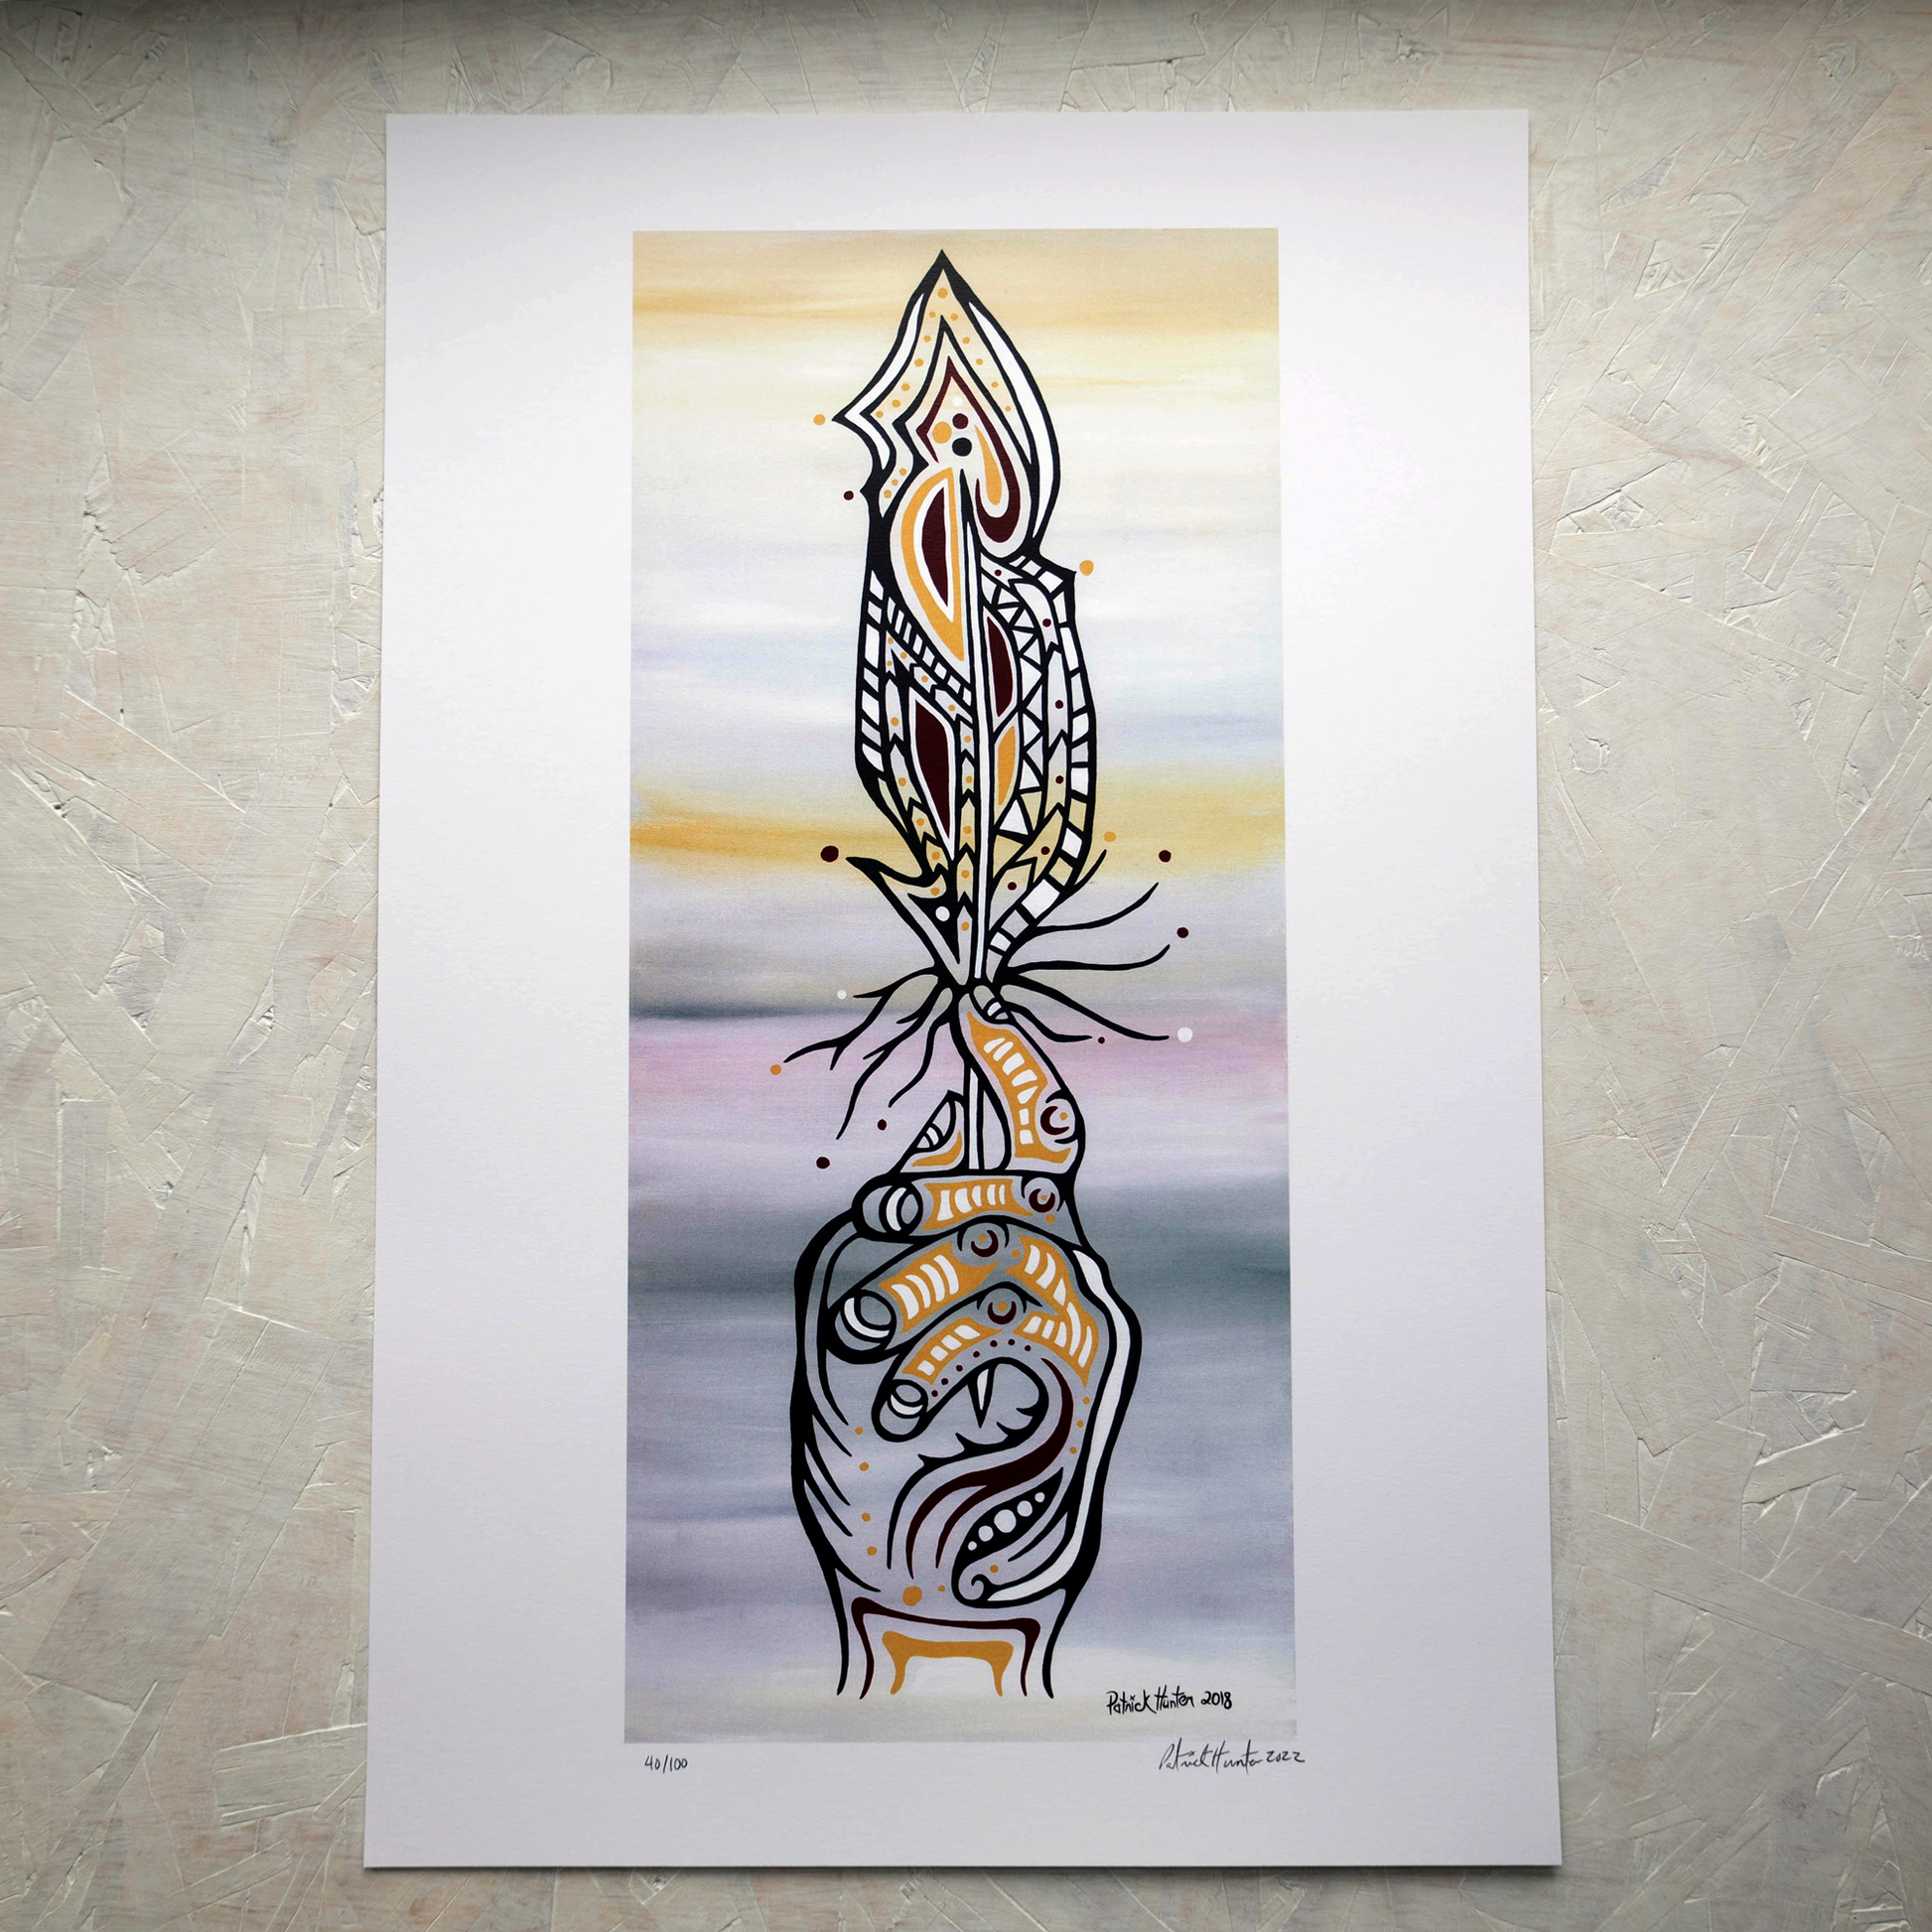 Print of Patrick Hunter's painting of a hand holding up a feather against a gradient background, woodland art style.